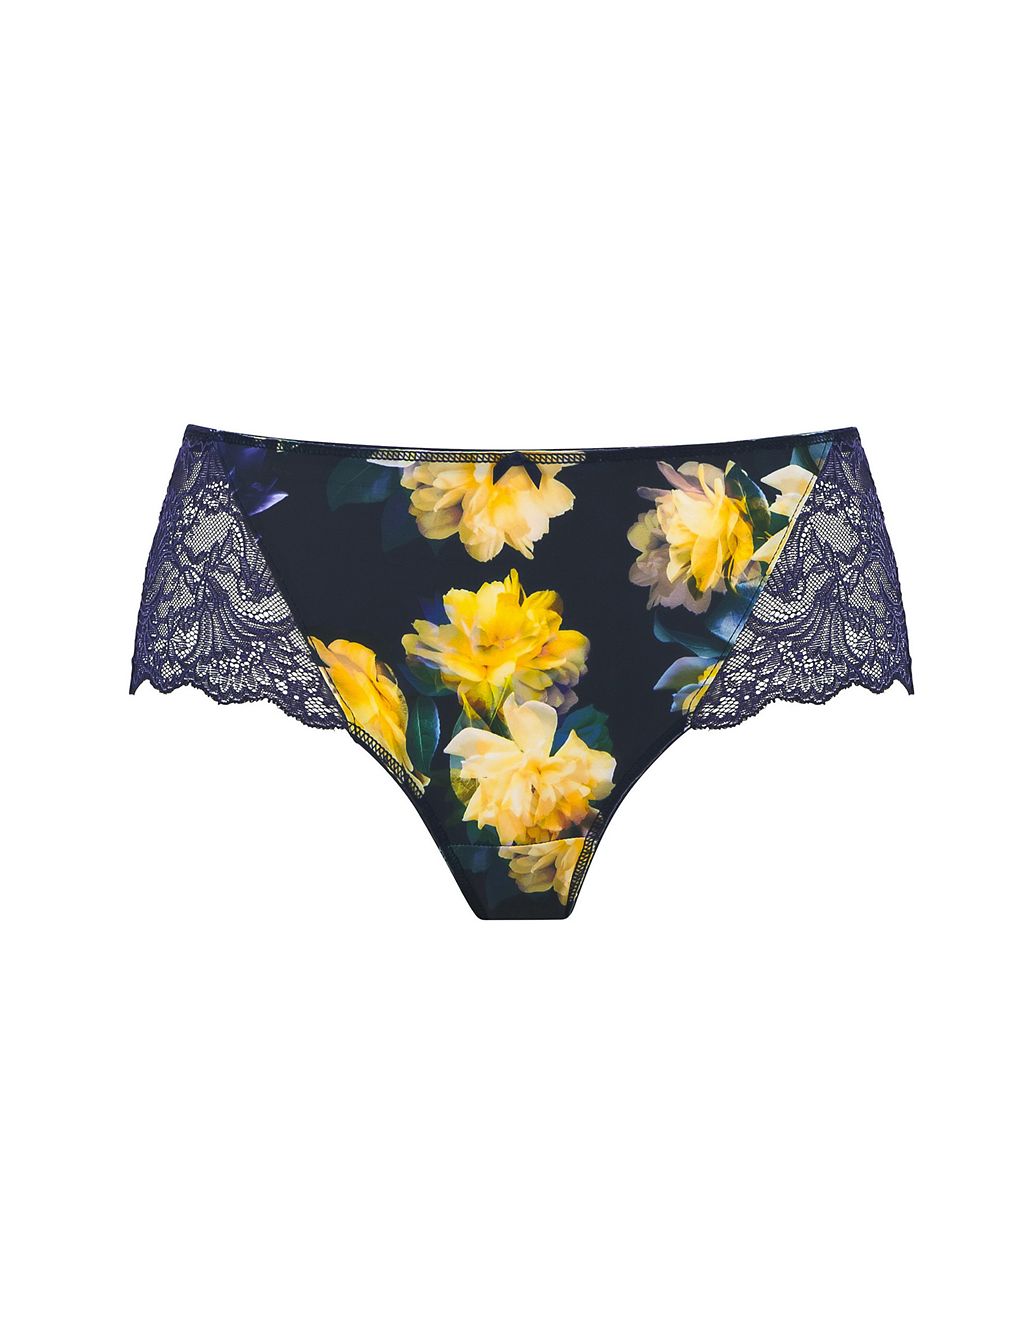 Lucia Lace Floral Knicker Shorts 1 of 6